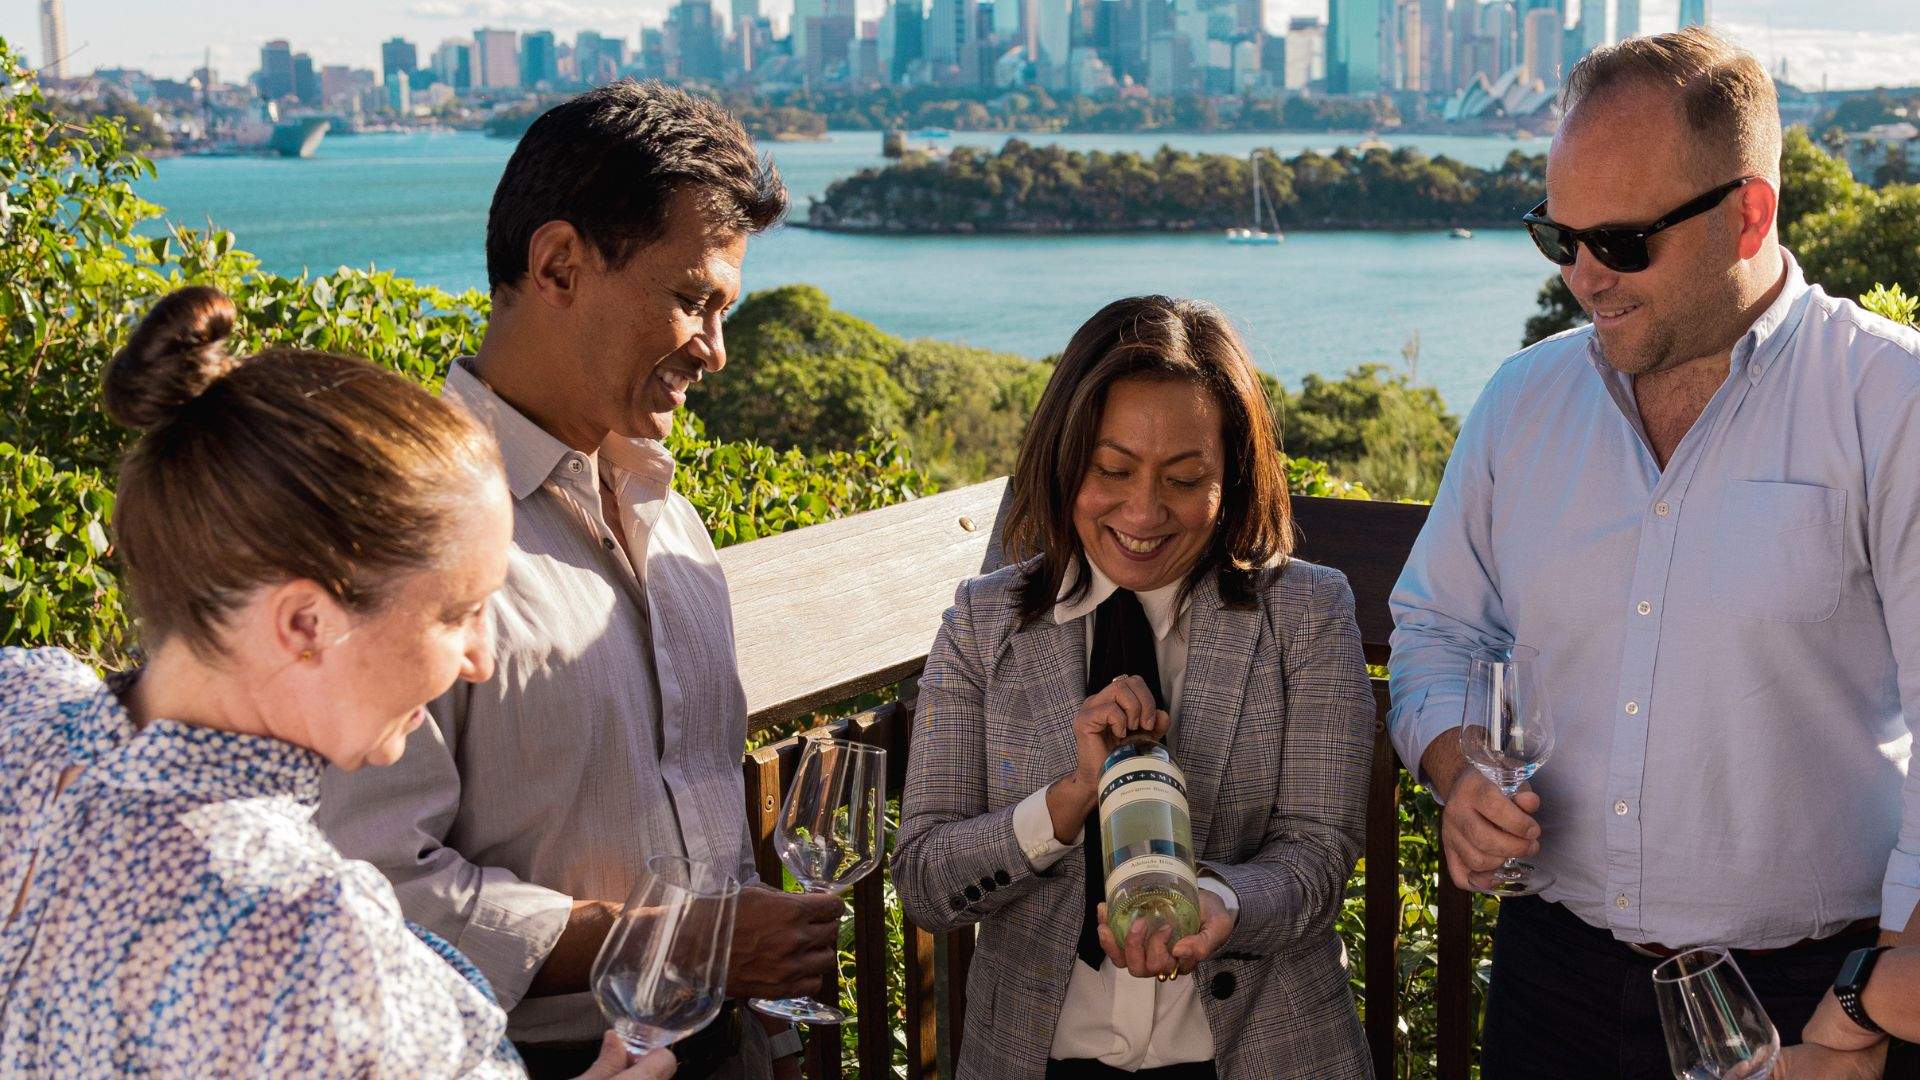 Limited-edition and adults-only wine safari tour, a new edition of Taronga Zoo's Roar & Snore offering.